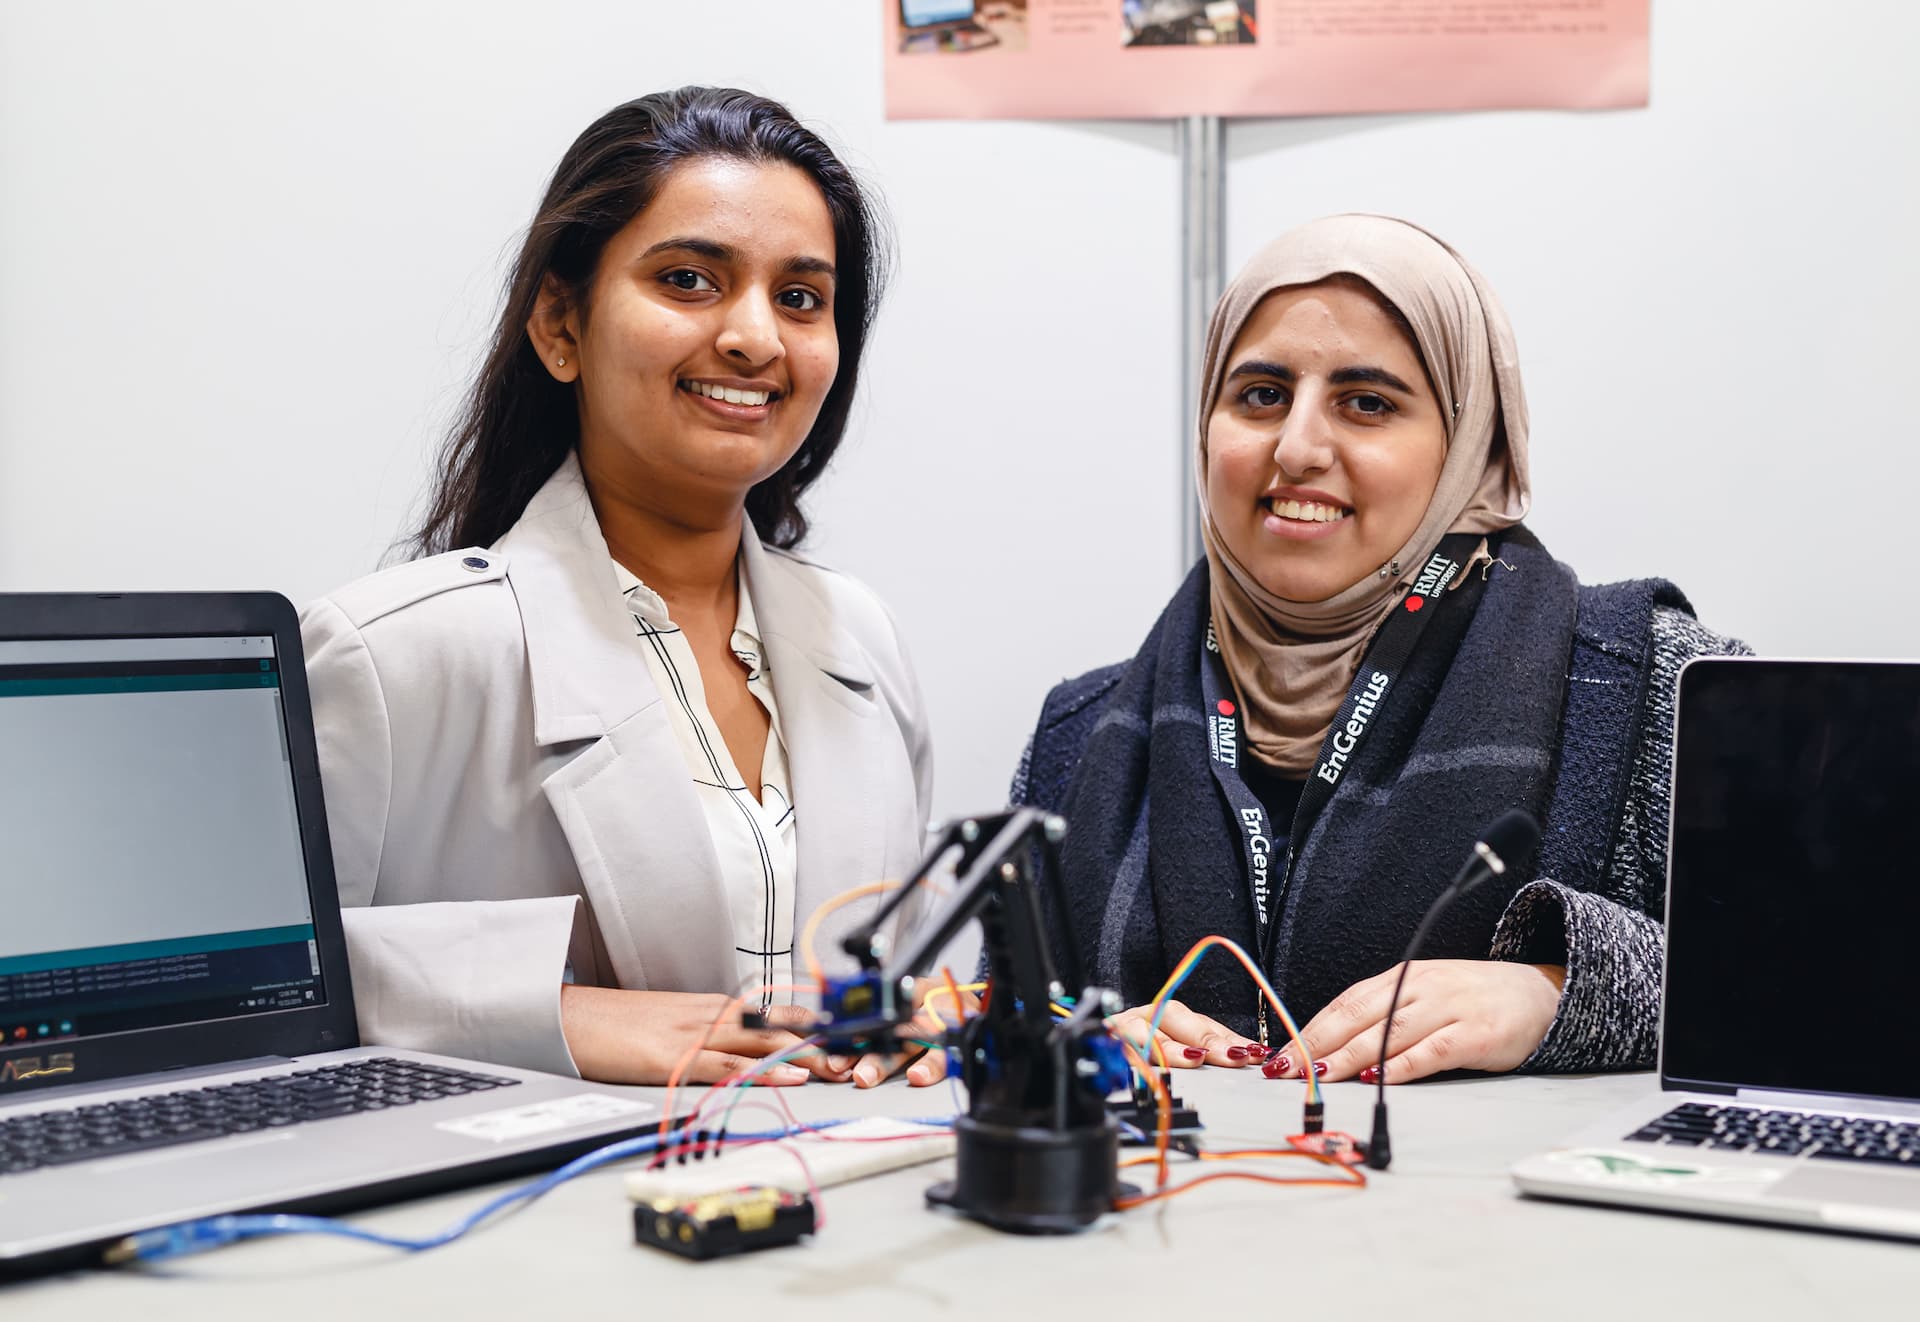 Two students smiling with with small robotics connected to laptops